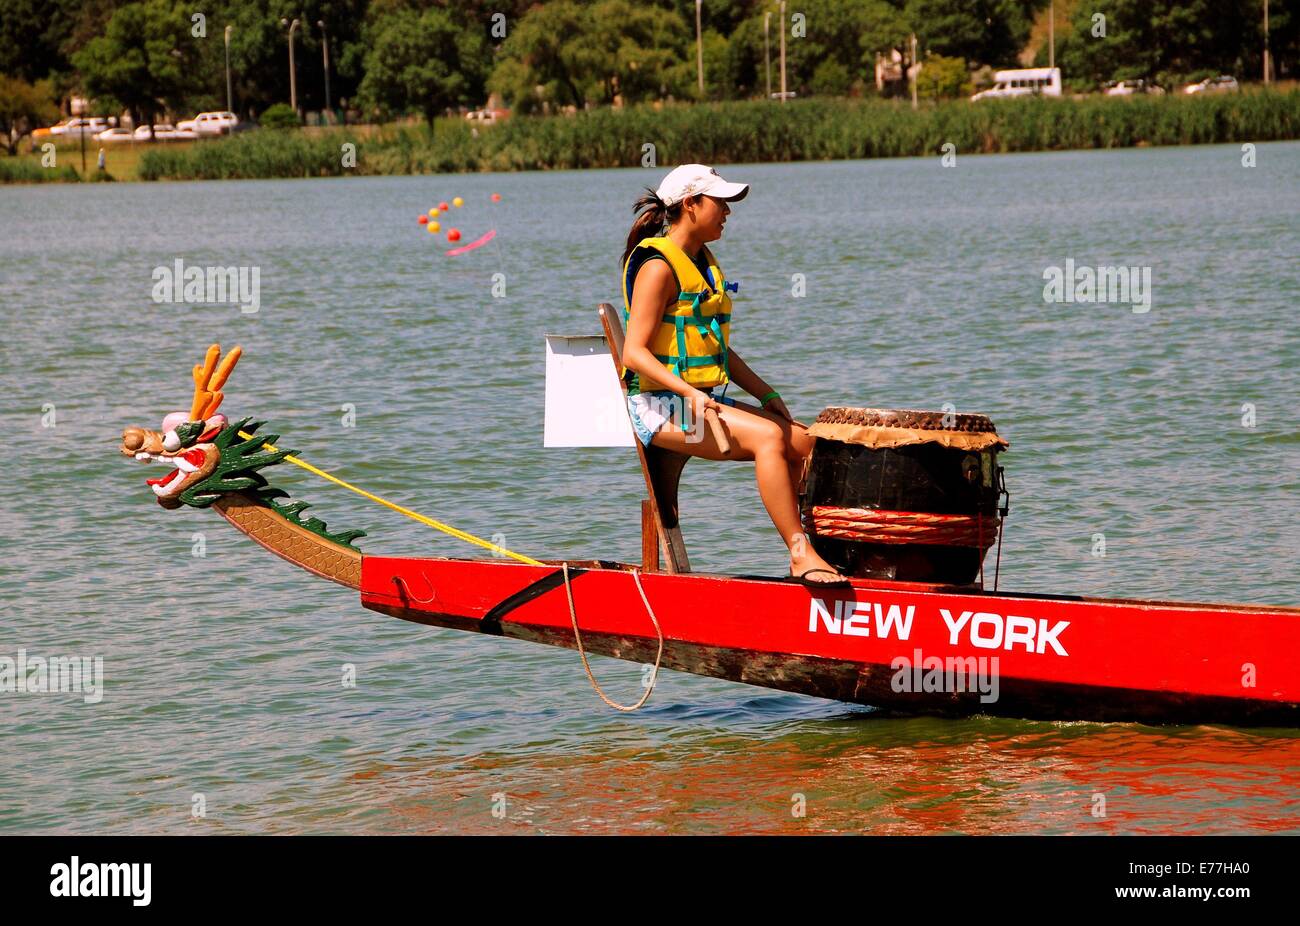 QUEENS, NY:  Woman drummer standin on the bow beating rhythm during the Hong Kong Dragon Boat Races in Flushing Meadows Park Stock Photo